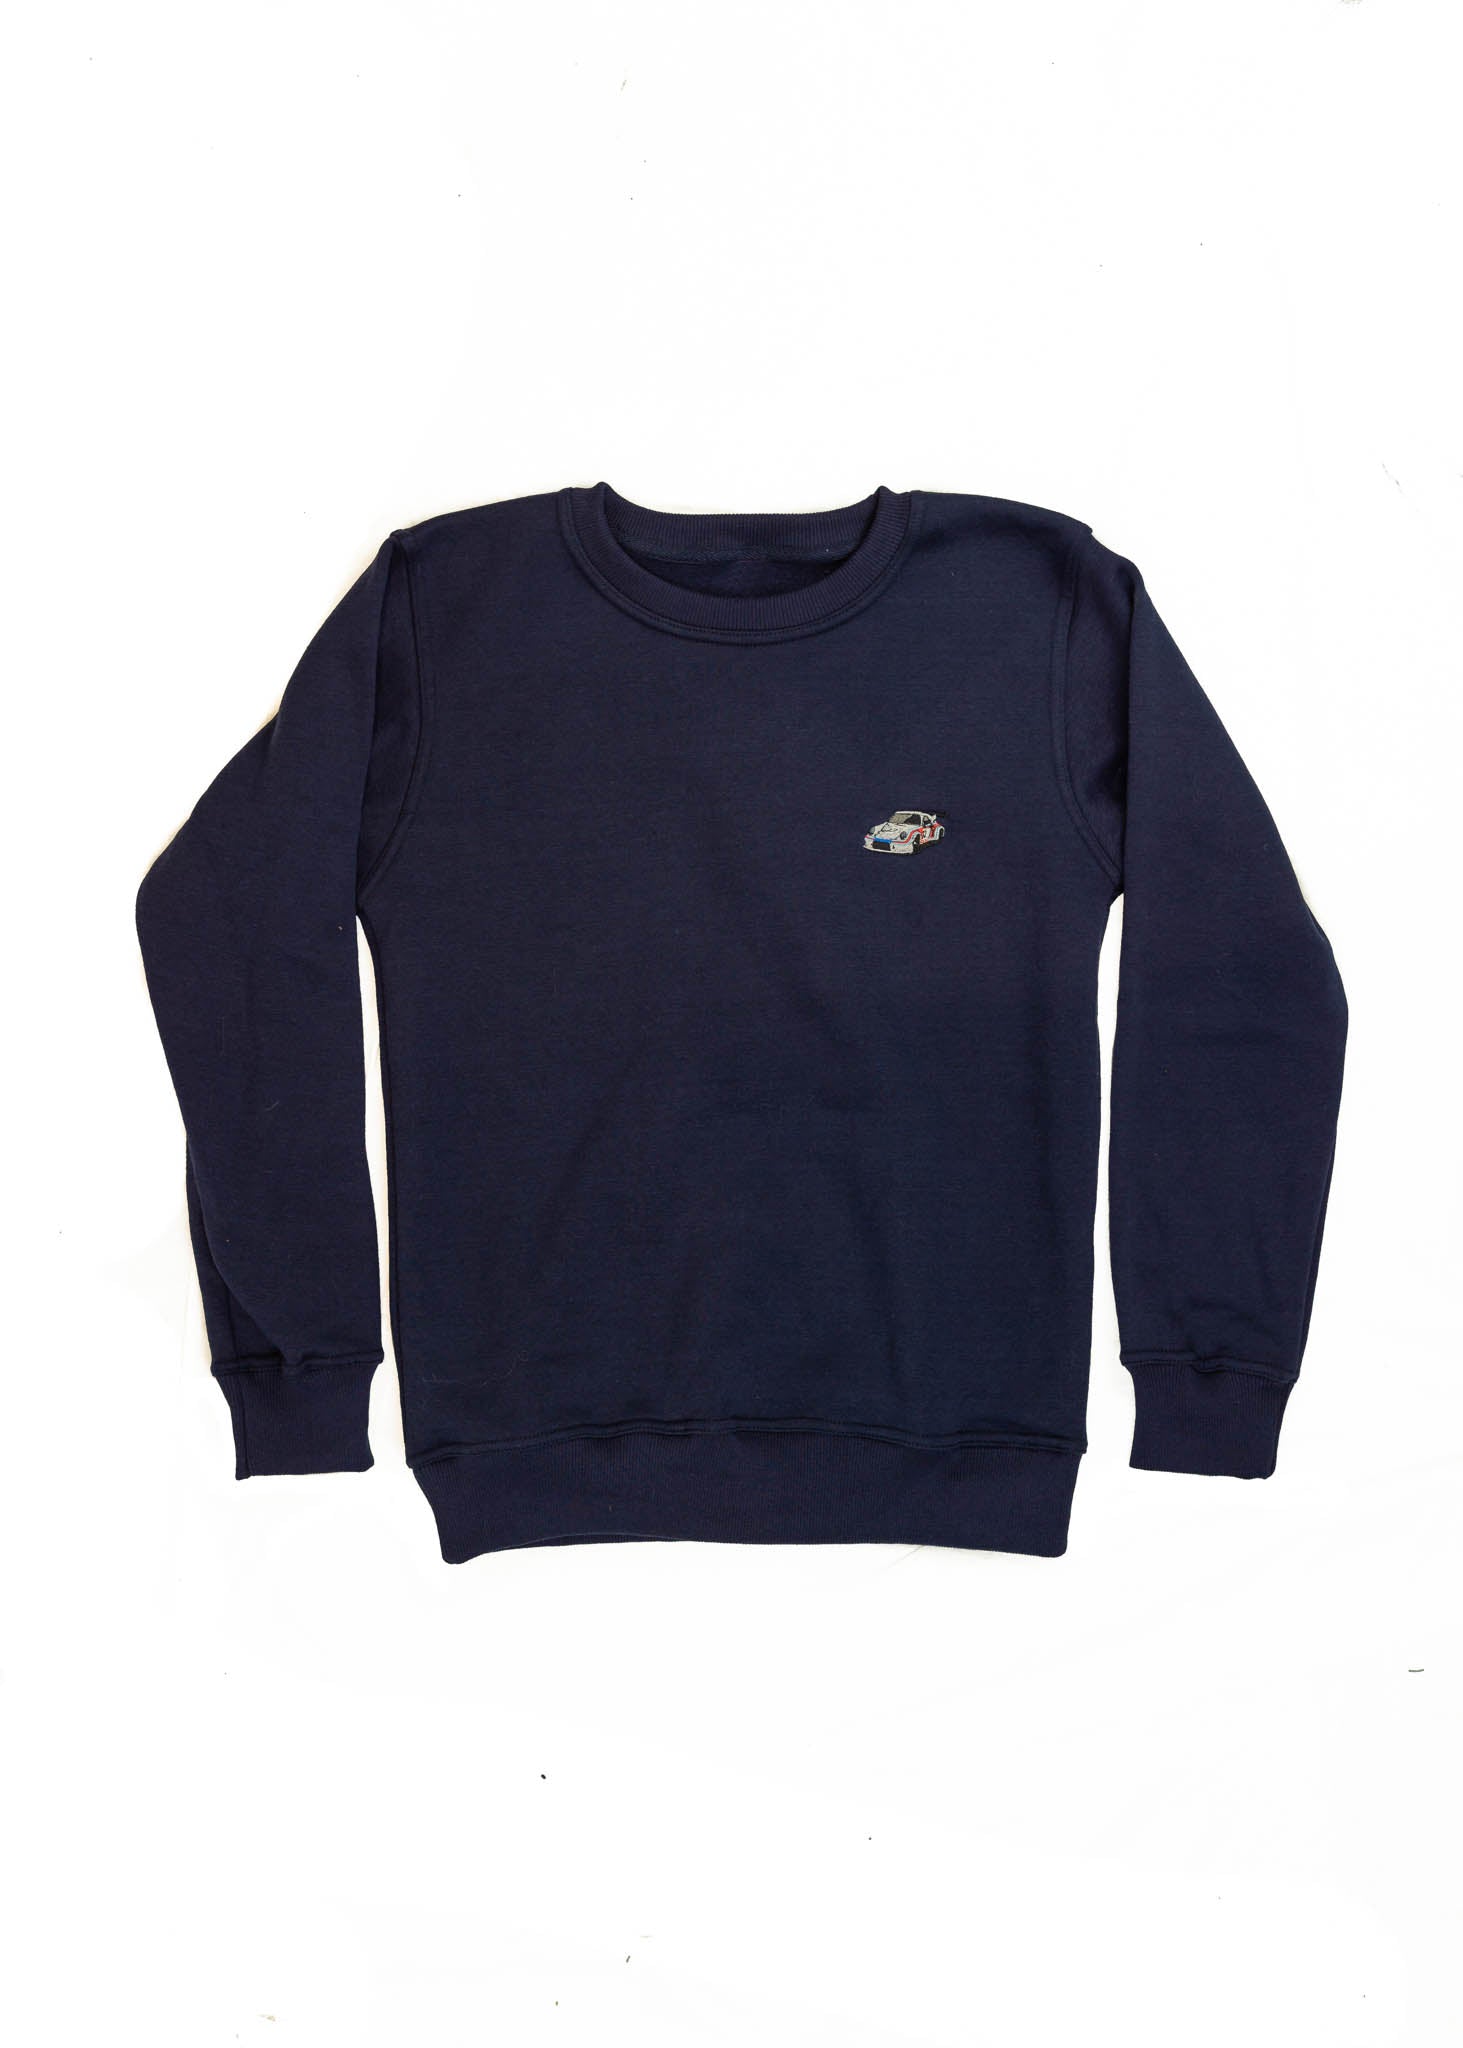 A navy blue Porsche race car crewneck sweater for men. Photo is a front view of the sweater with an embroidered Martini R13 Porsche 911 Carrera RSR 2.1 Turbo . Fabric is 100% cotton and high quality and fits to size. The style is long sleeve, crew neck, and embroidery on left chest.